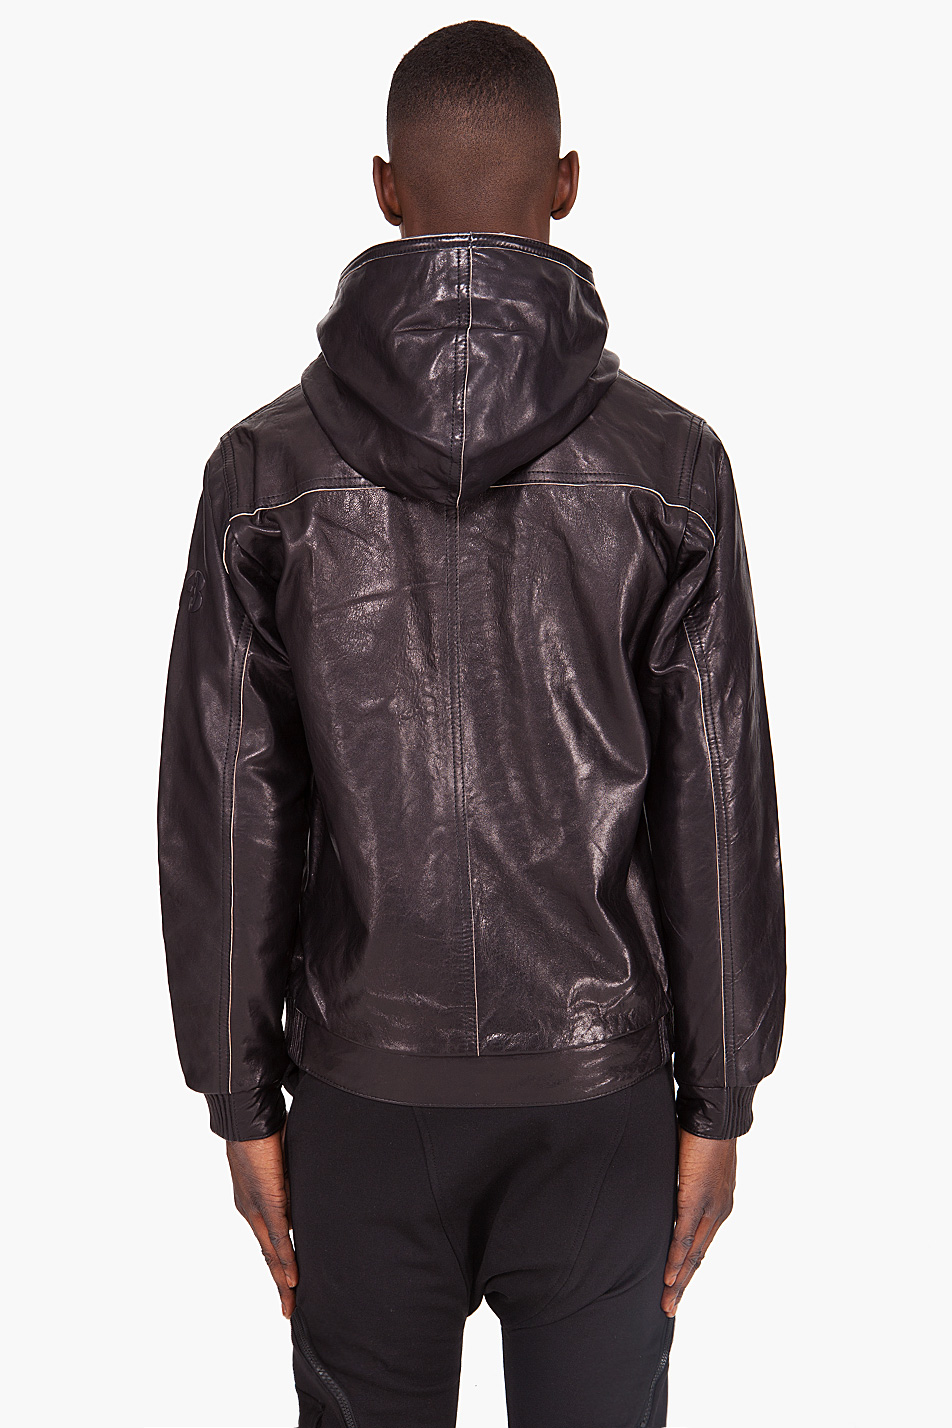 Y-3 Hooded Leather Jacket in Black for Men | Lyst